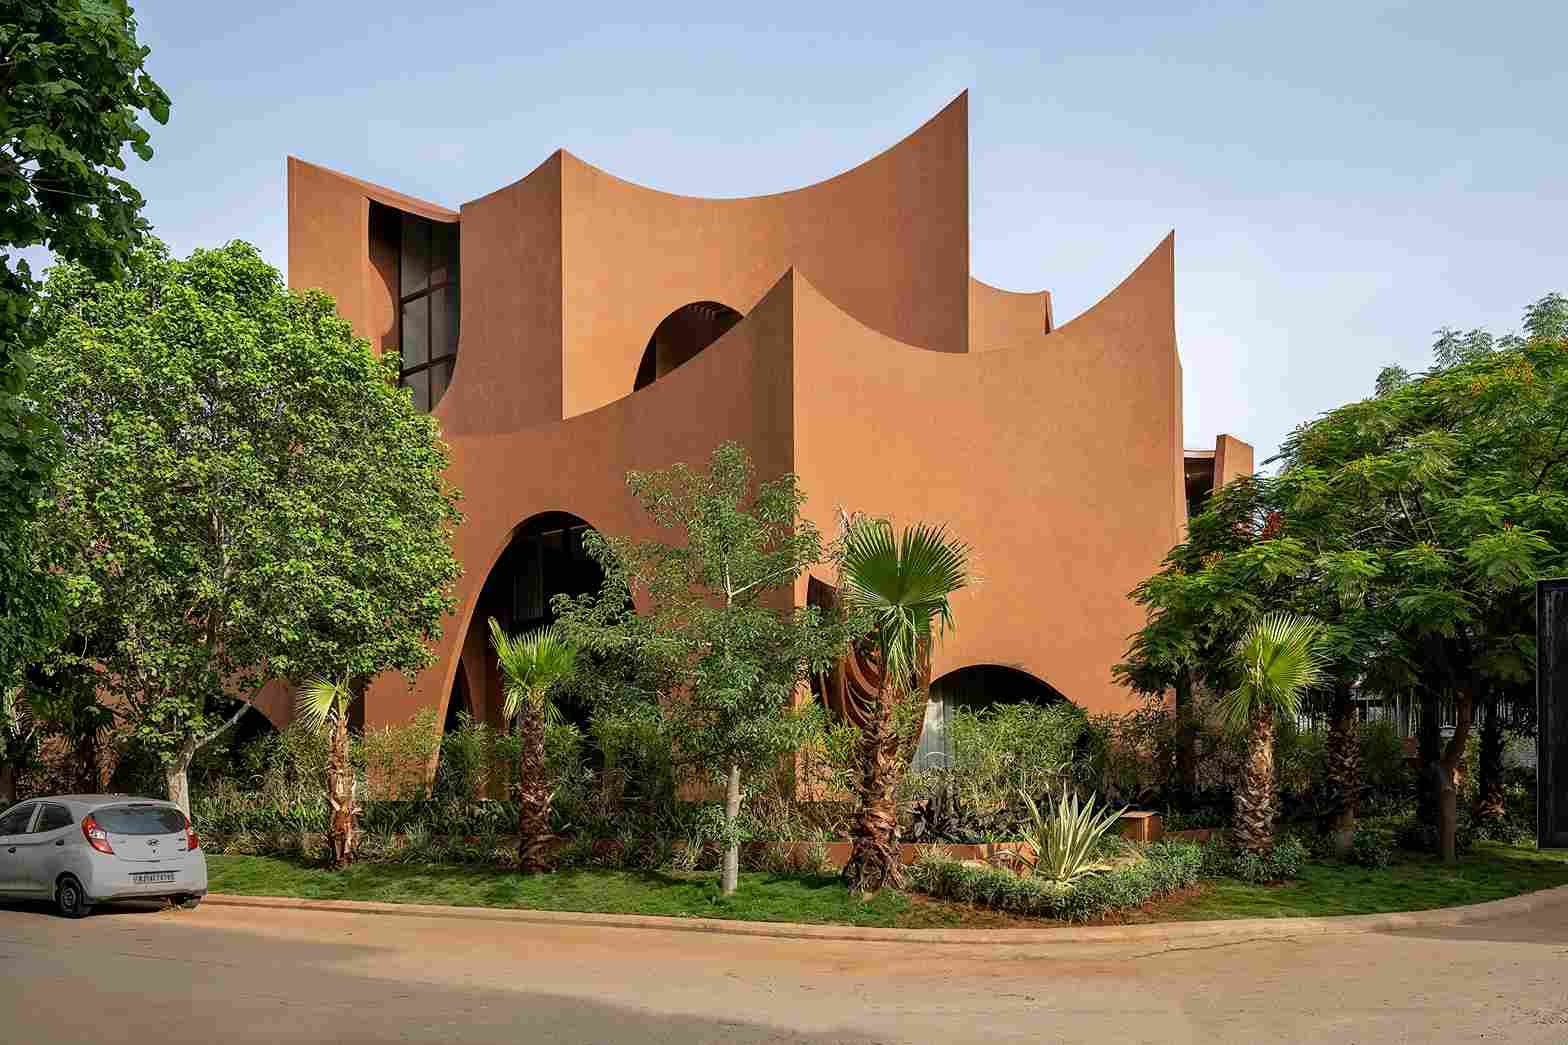 Mirai The House of Arches is constructed with earth, sandstone and plaster as the main materials